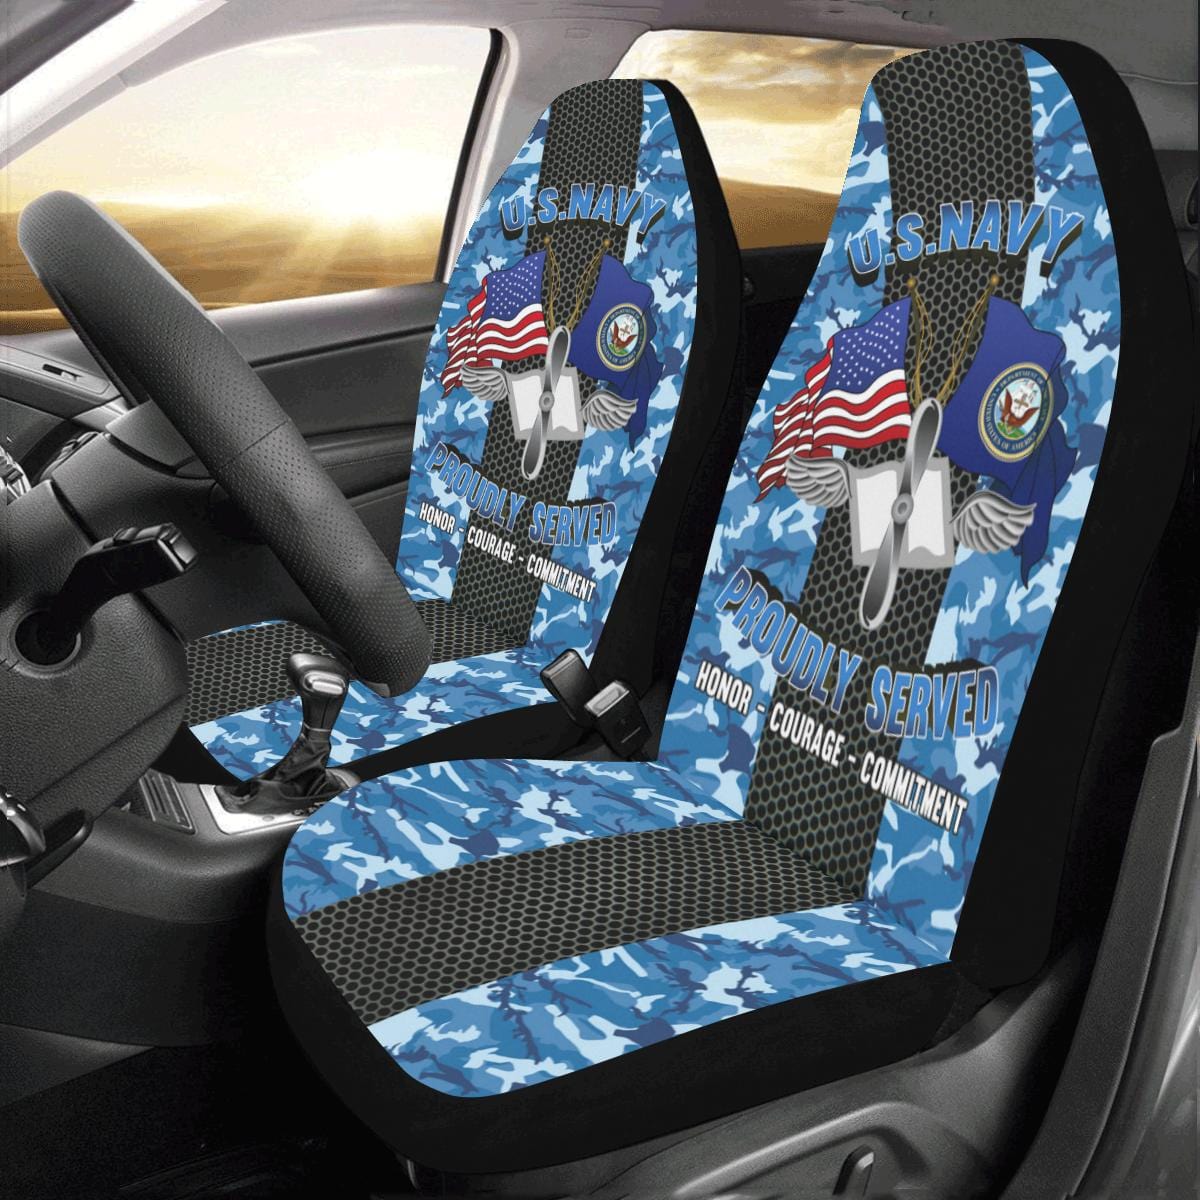 Navy Aviation Maintenance Administrationman Navy AZ Car Seat Covers (Set of 2)-SeatCovers-Navy-Rate-Veterans Nation